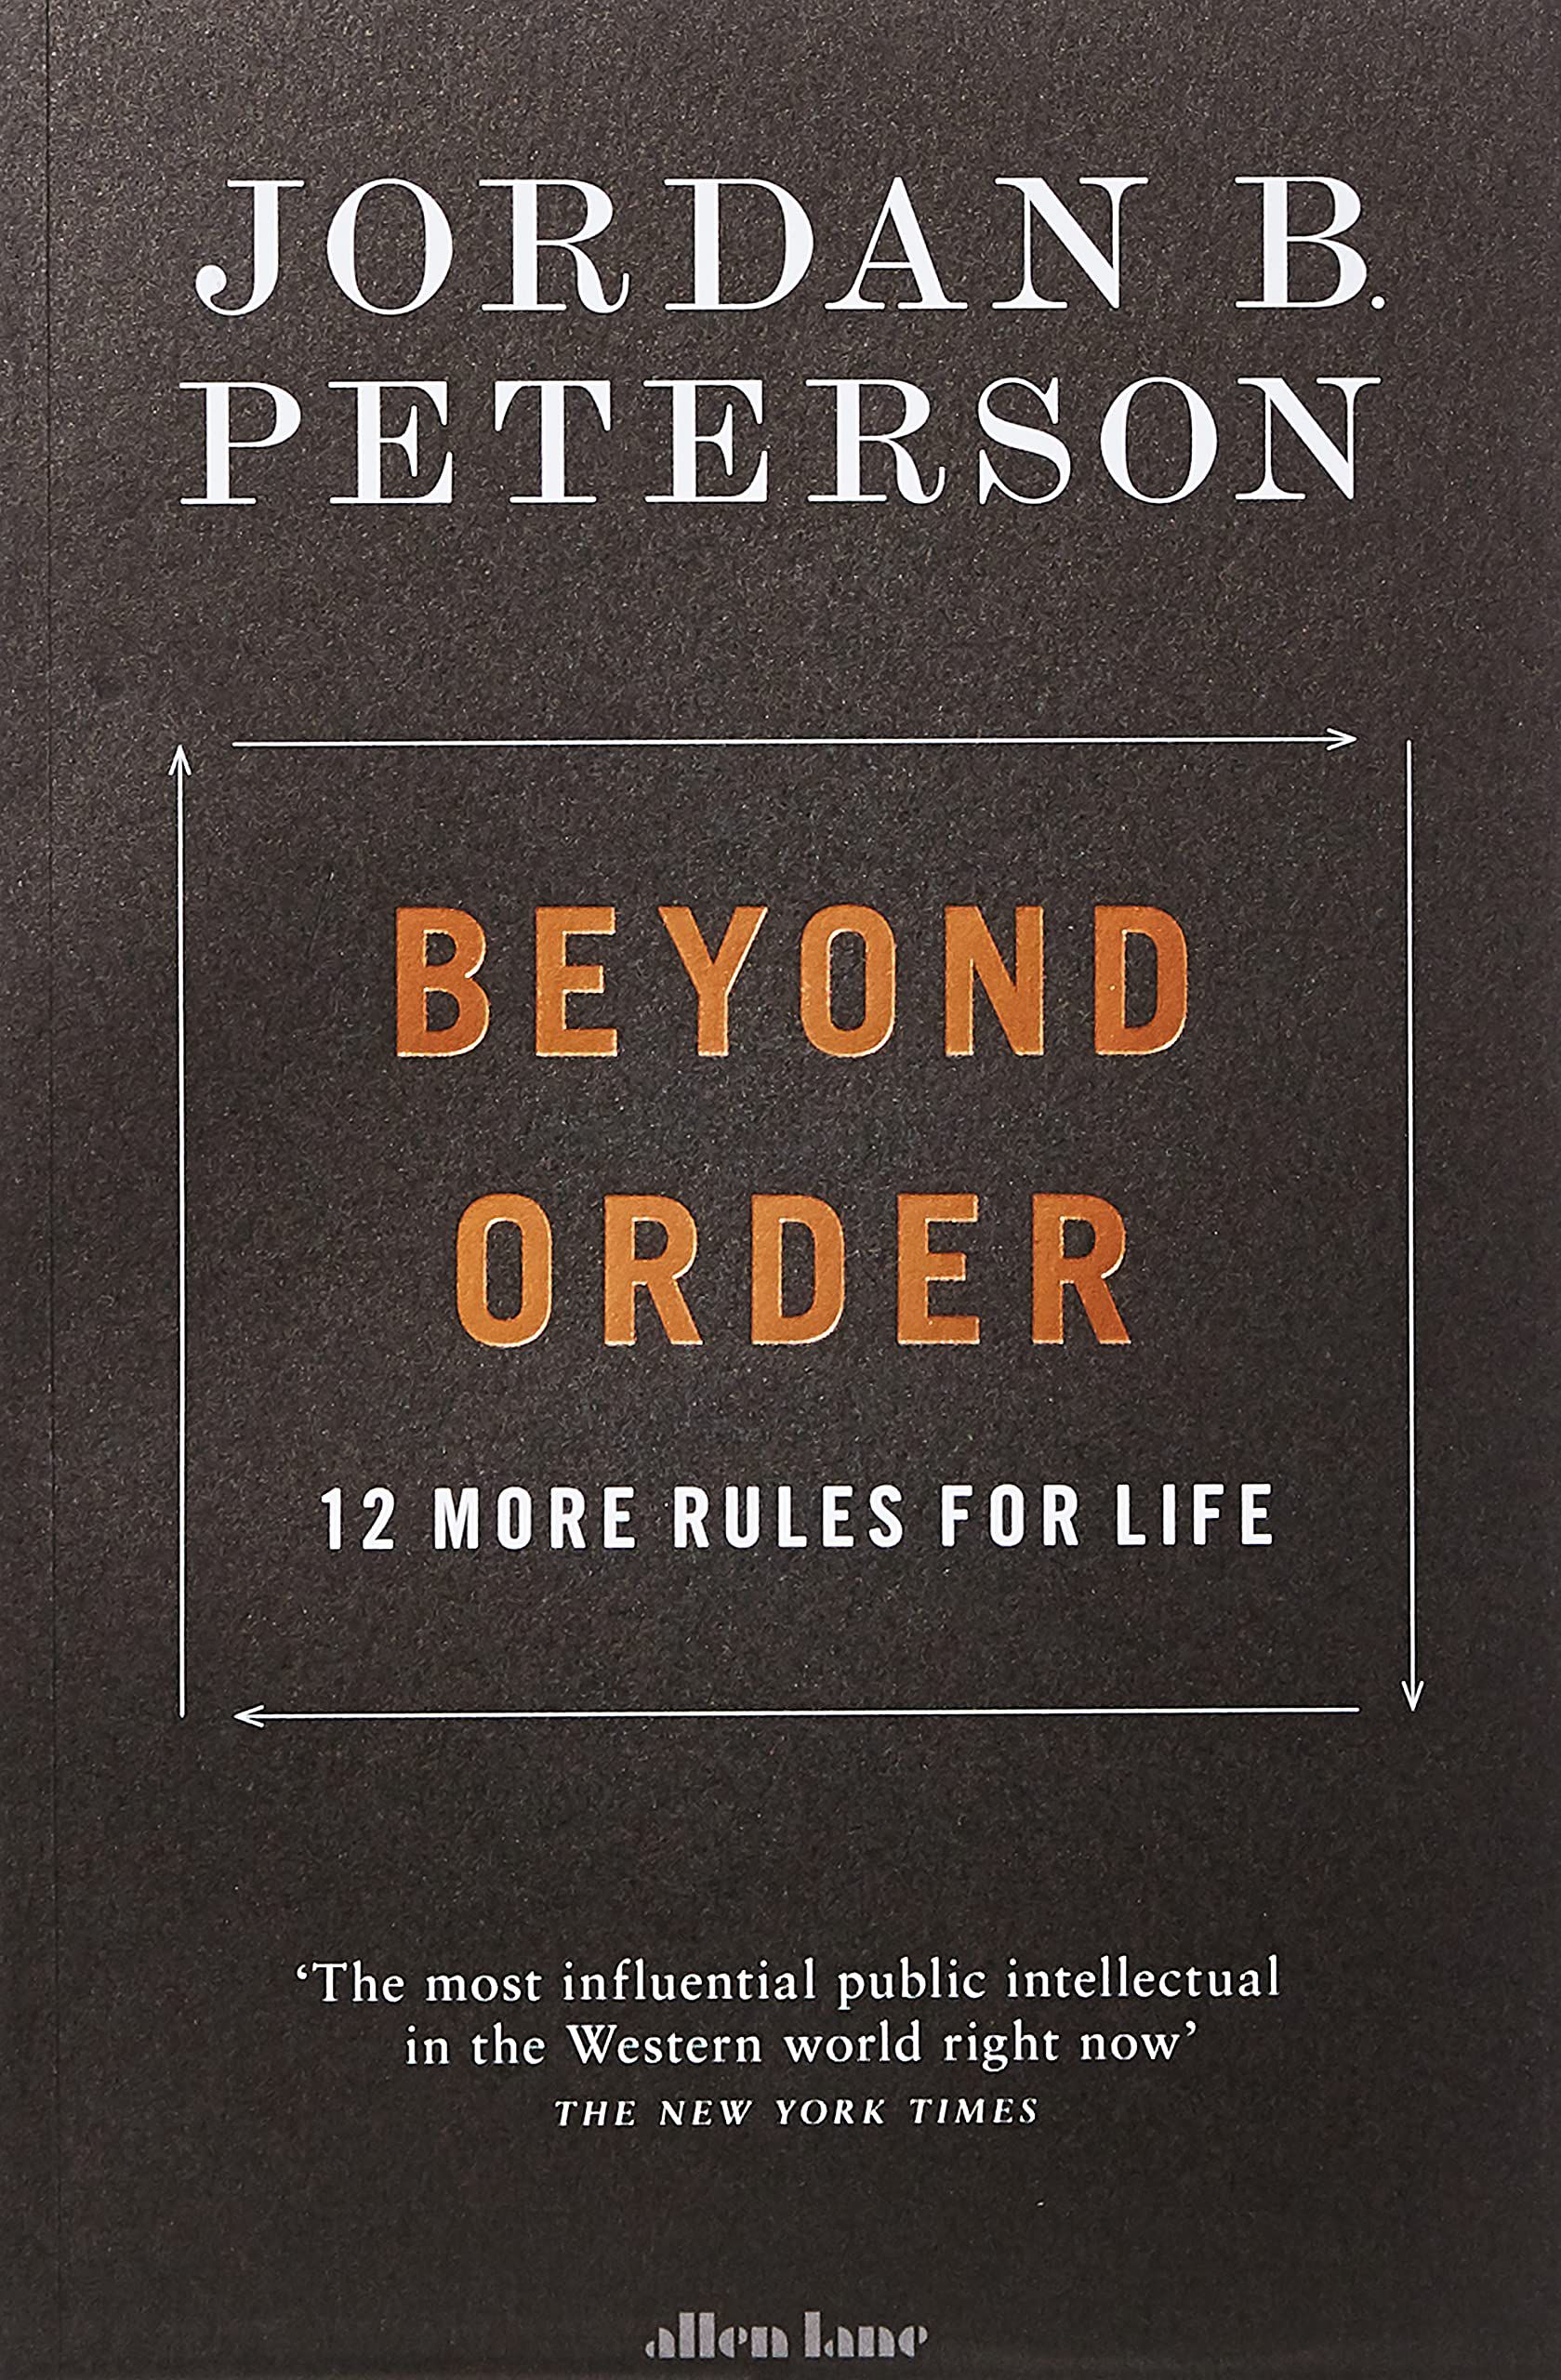     			Beyond Order: 12 More Rules for Life Paperback by Jordan B. Peterson